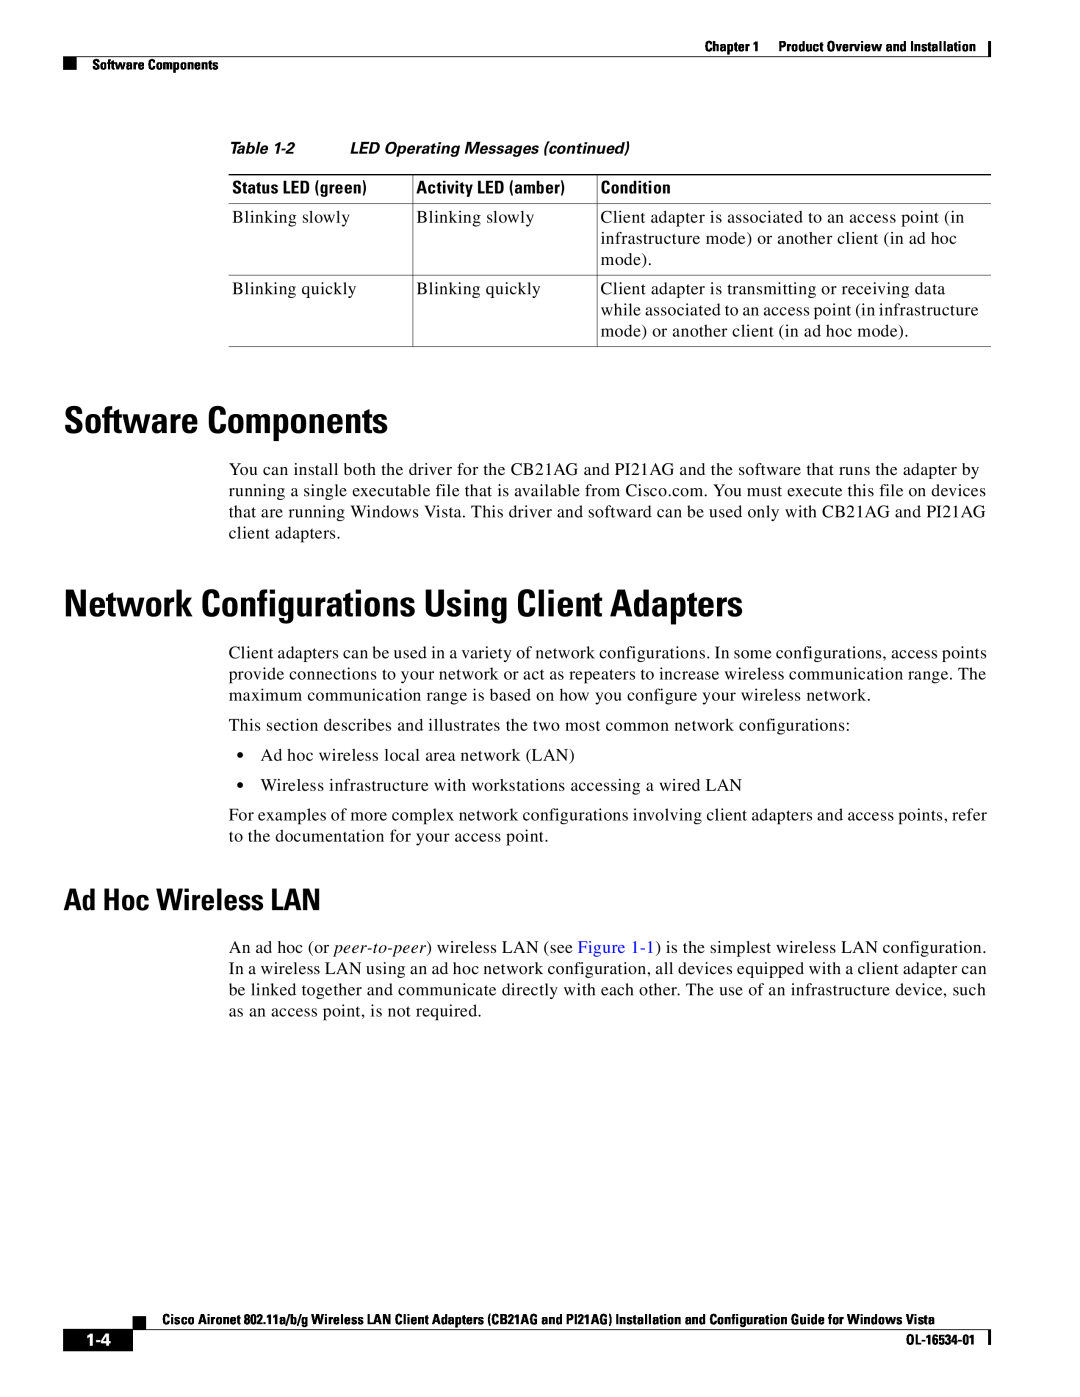 Cisco Systems PI21AG, CB21AG manual Software Components, Network Configurations Using Client Adapters, Ad Hoc Wireless LAN 